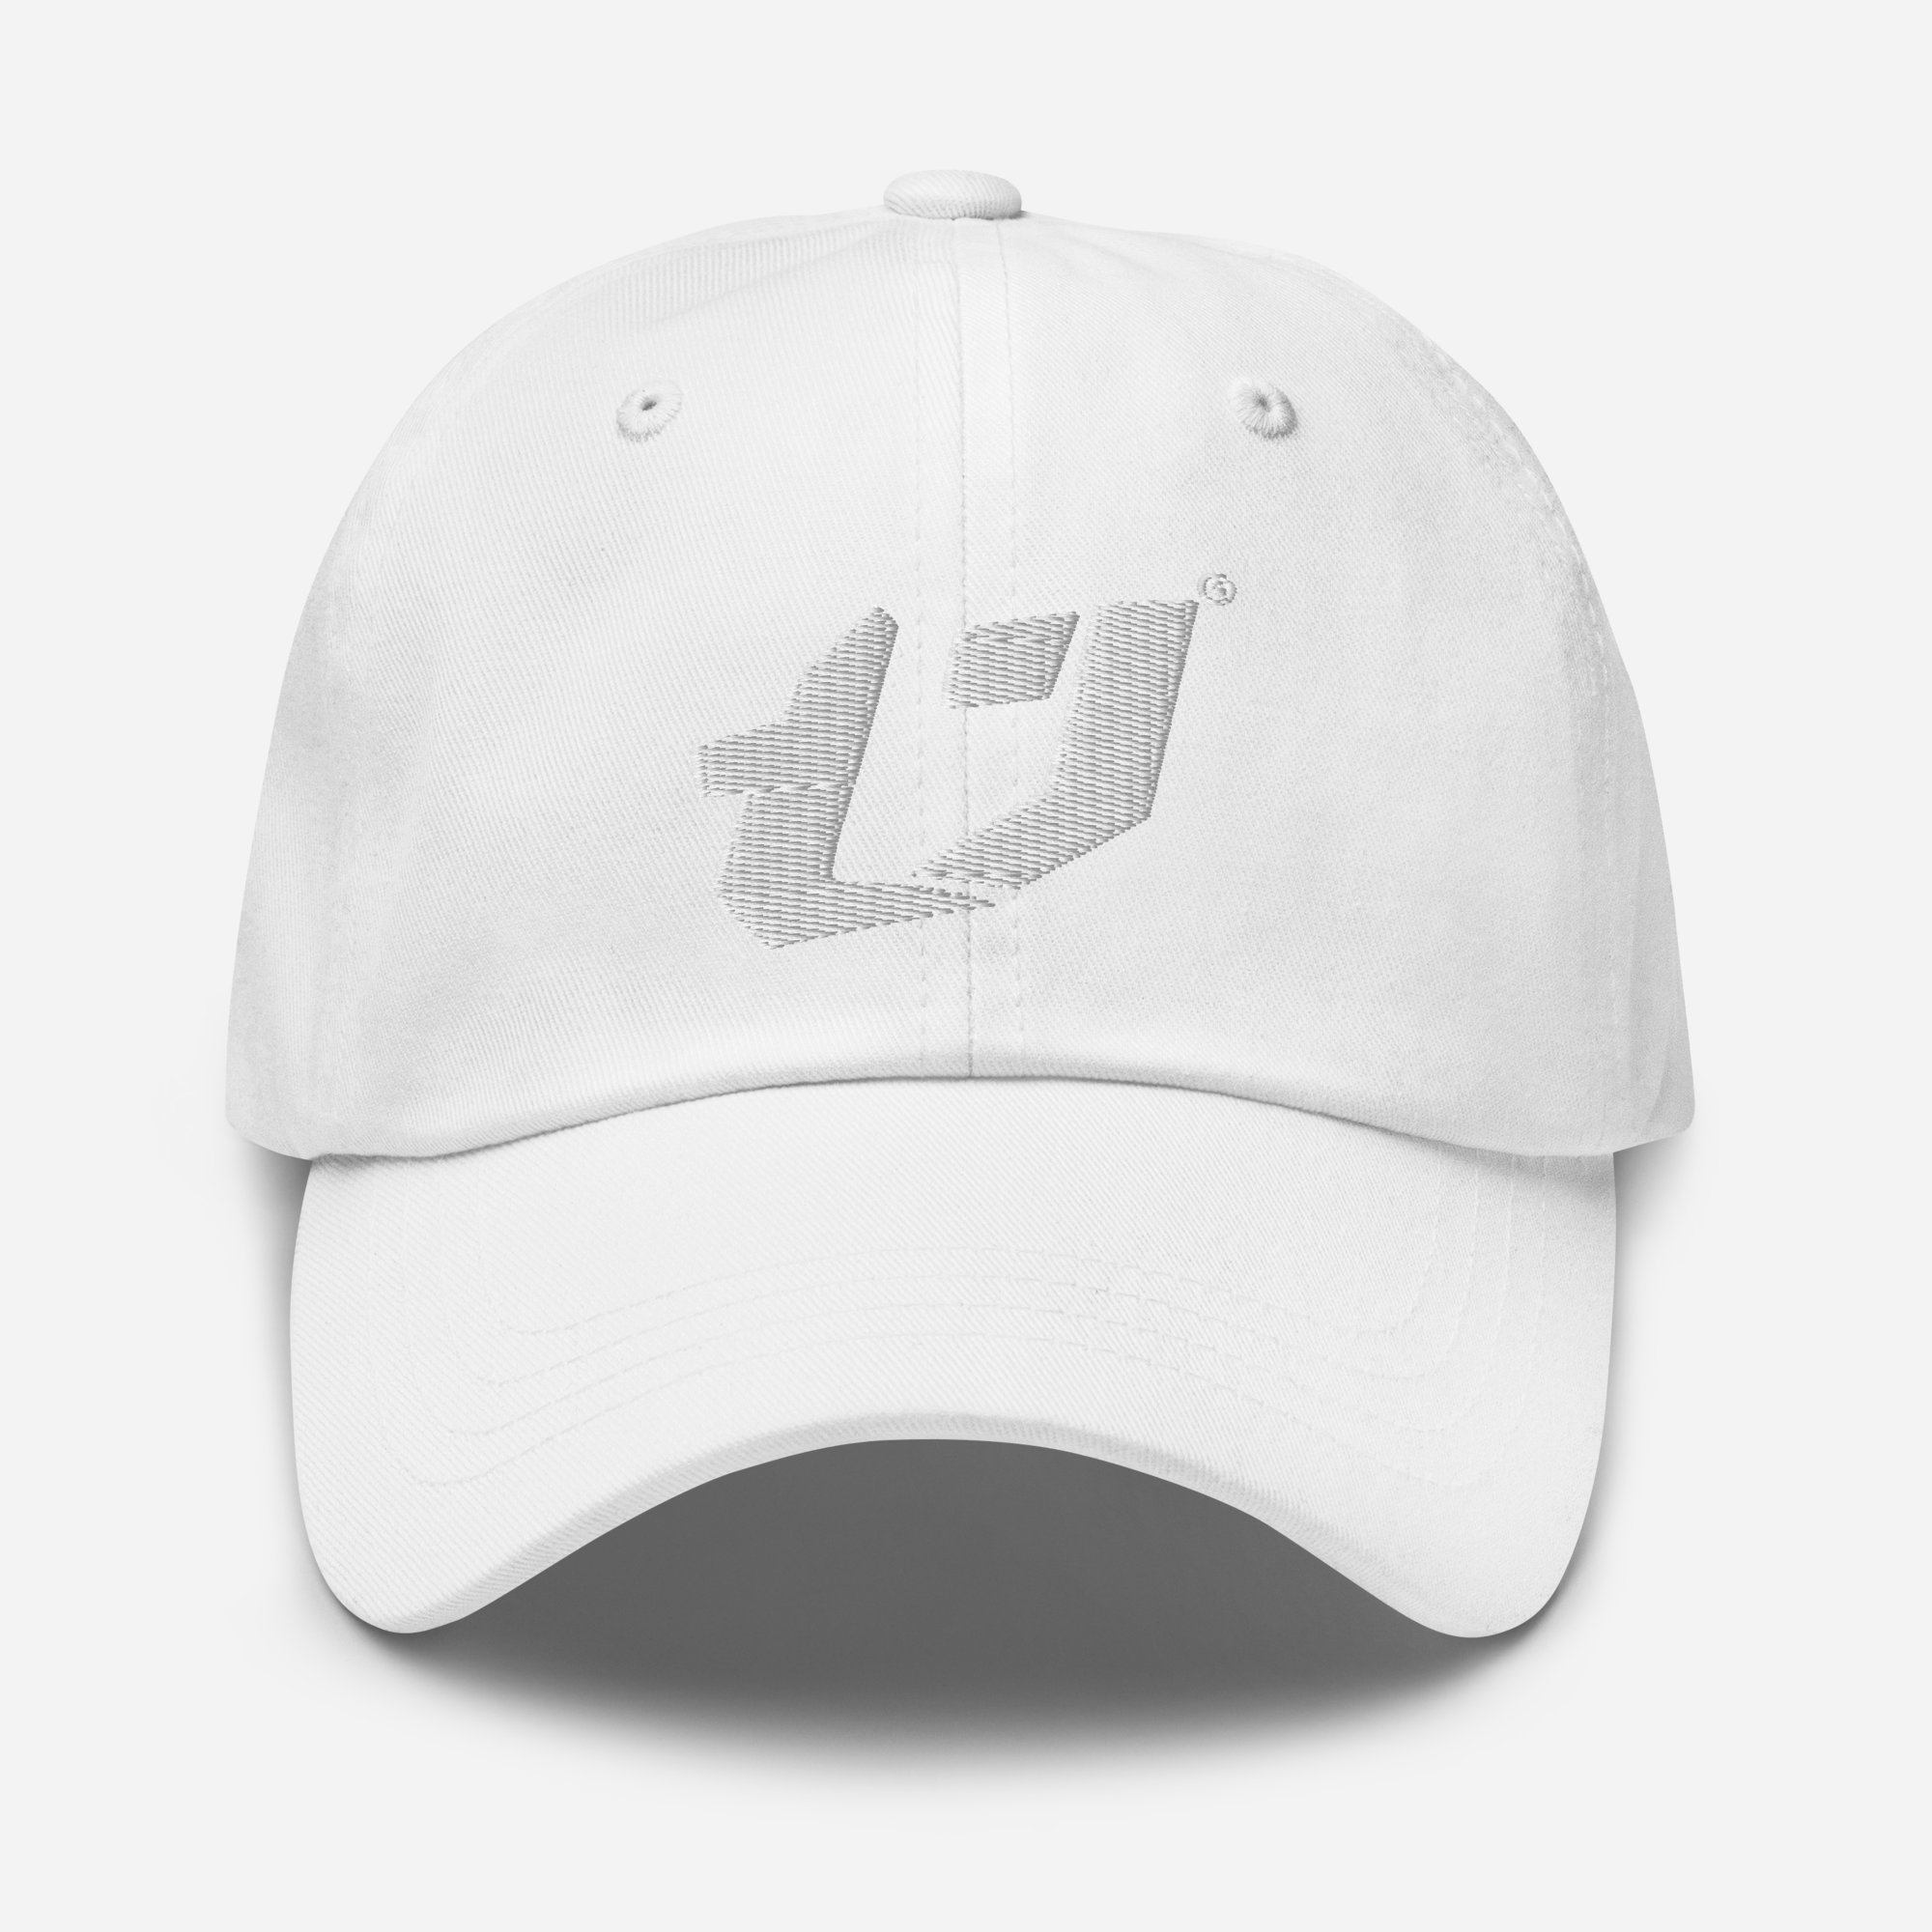 N'Trench Apparel Silver Logo Embroidery Dad hat